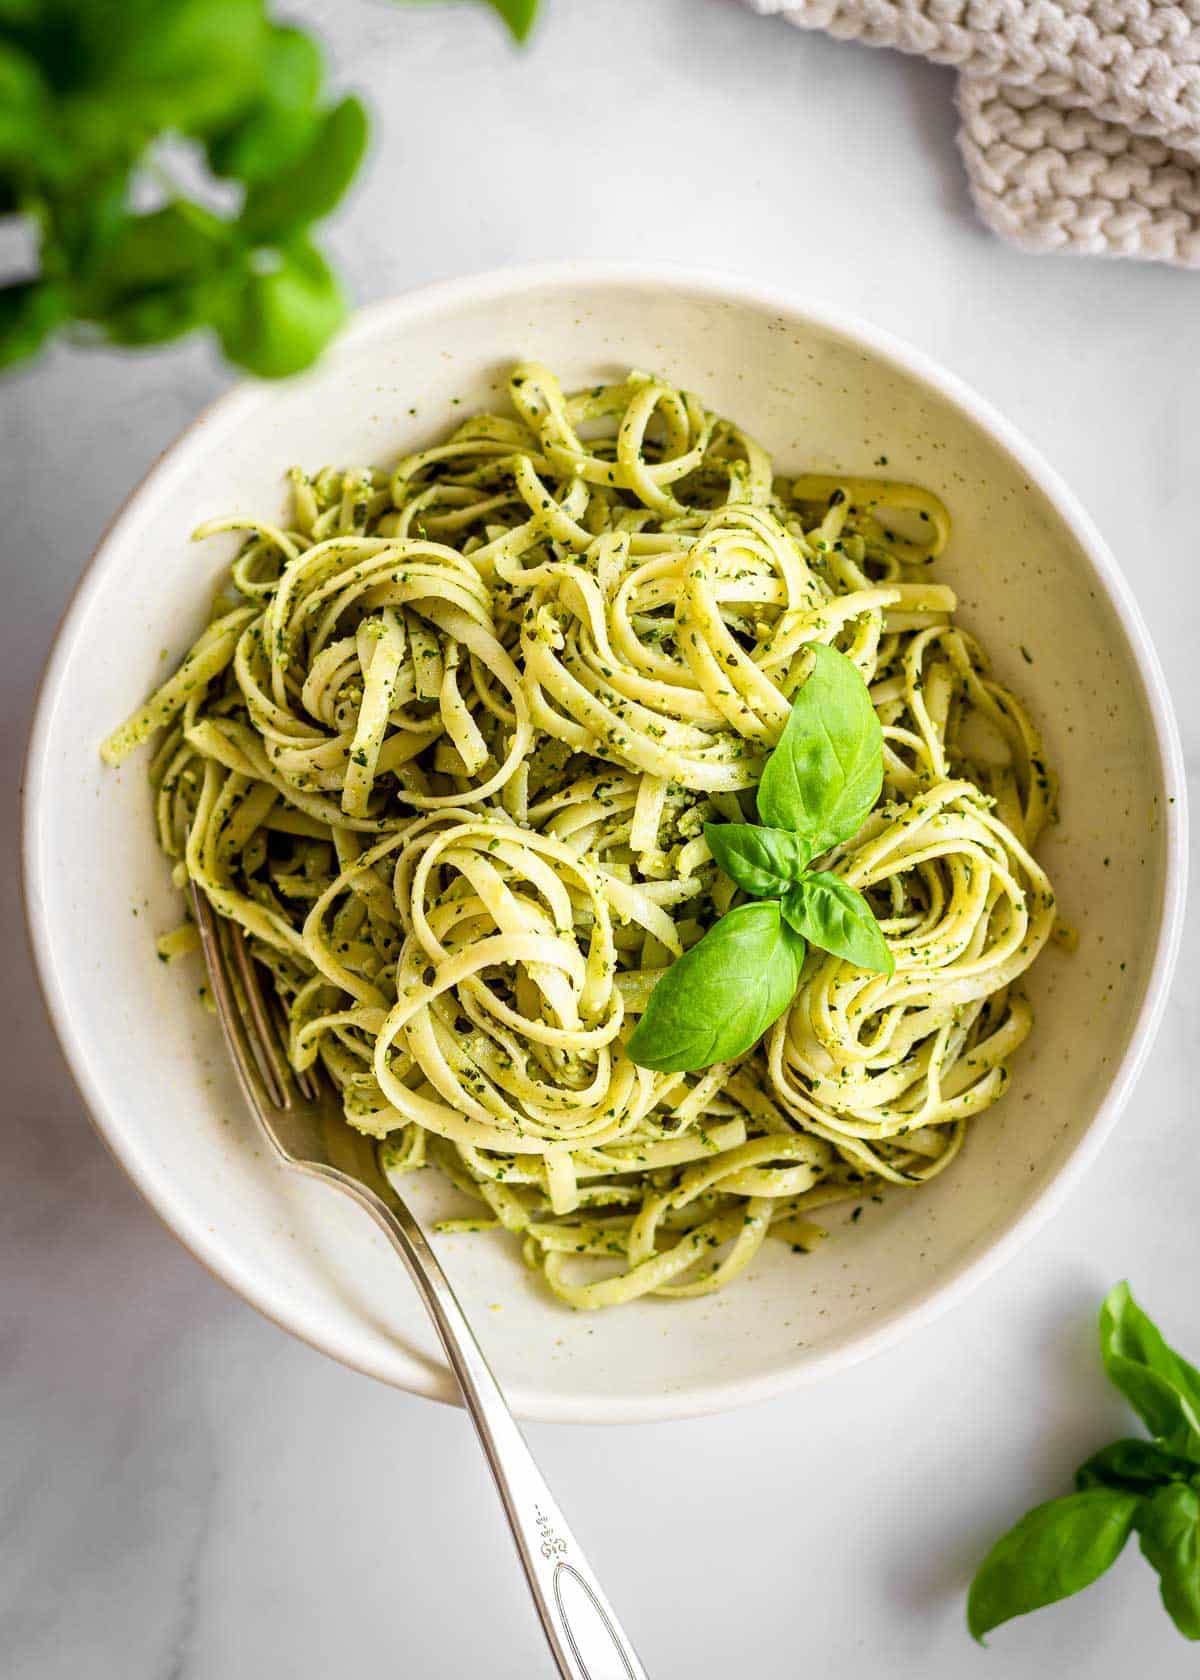 White bowl of pasta al pesto with basil leaves and on top and a fork on the side. More basil leaves and a white cloth are off to the side.